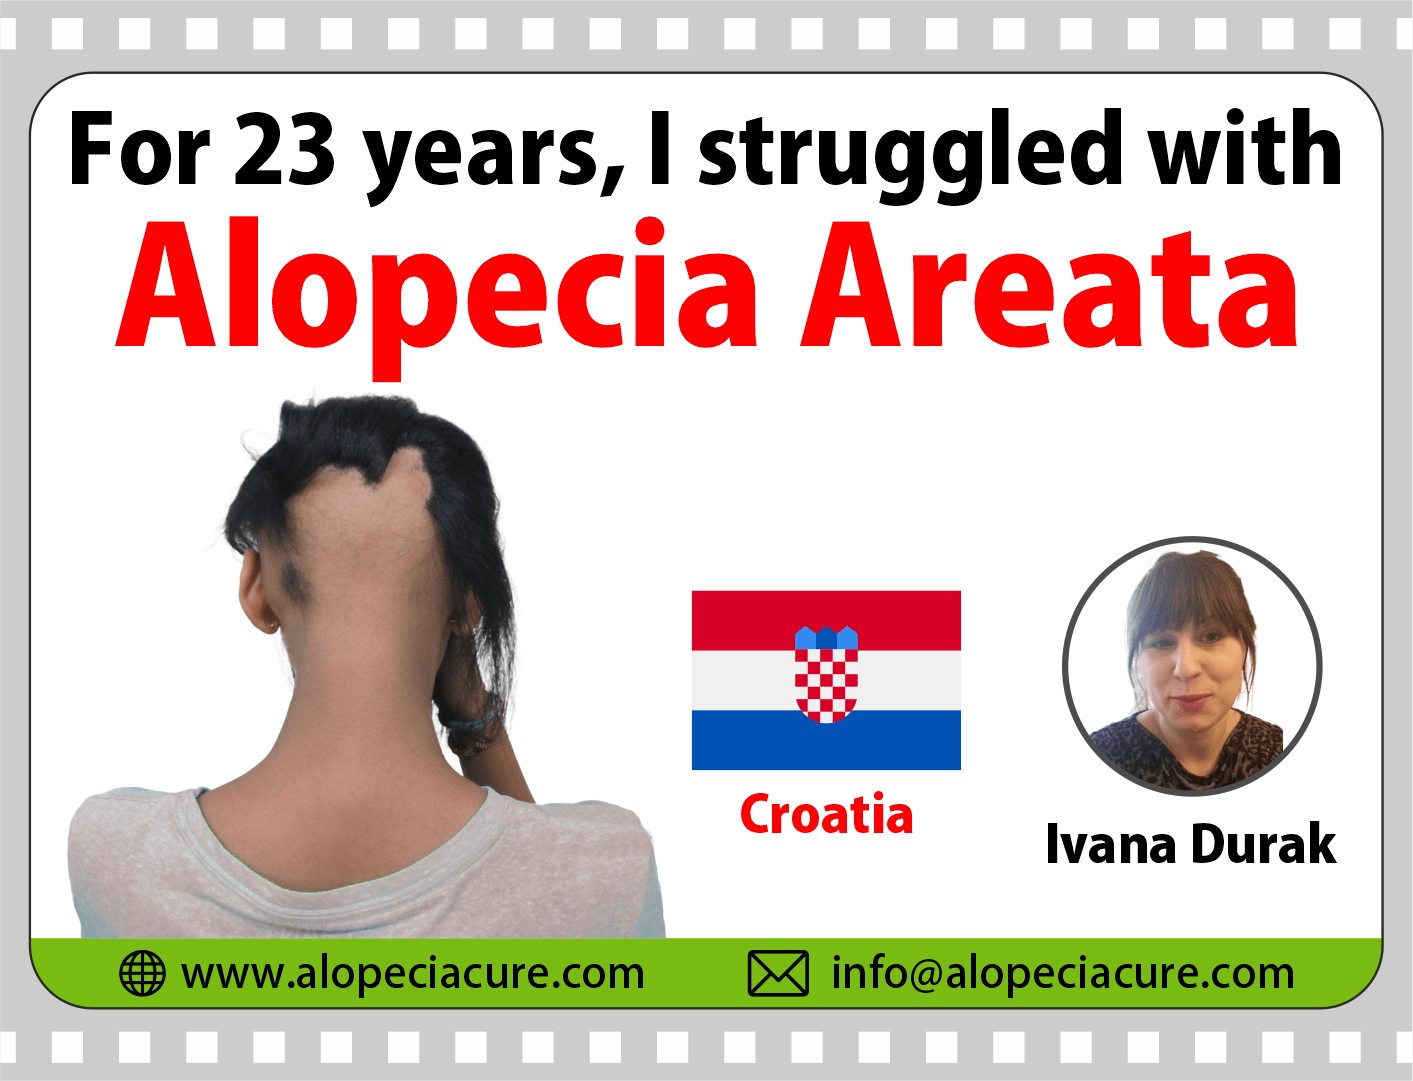 Croatia patient review for Dr. Rohit's natural treatment for alopecia areata